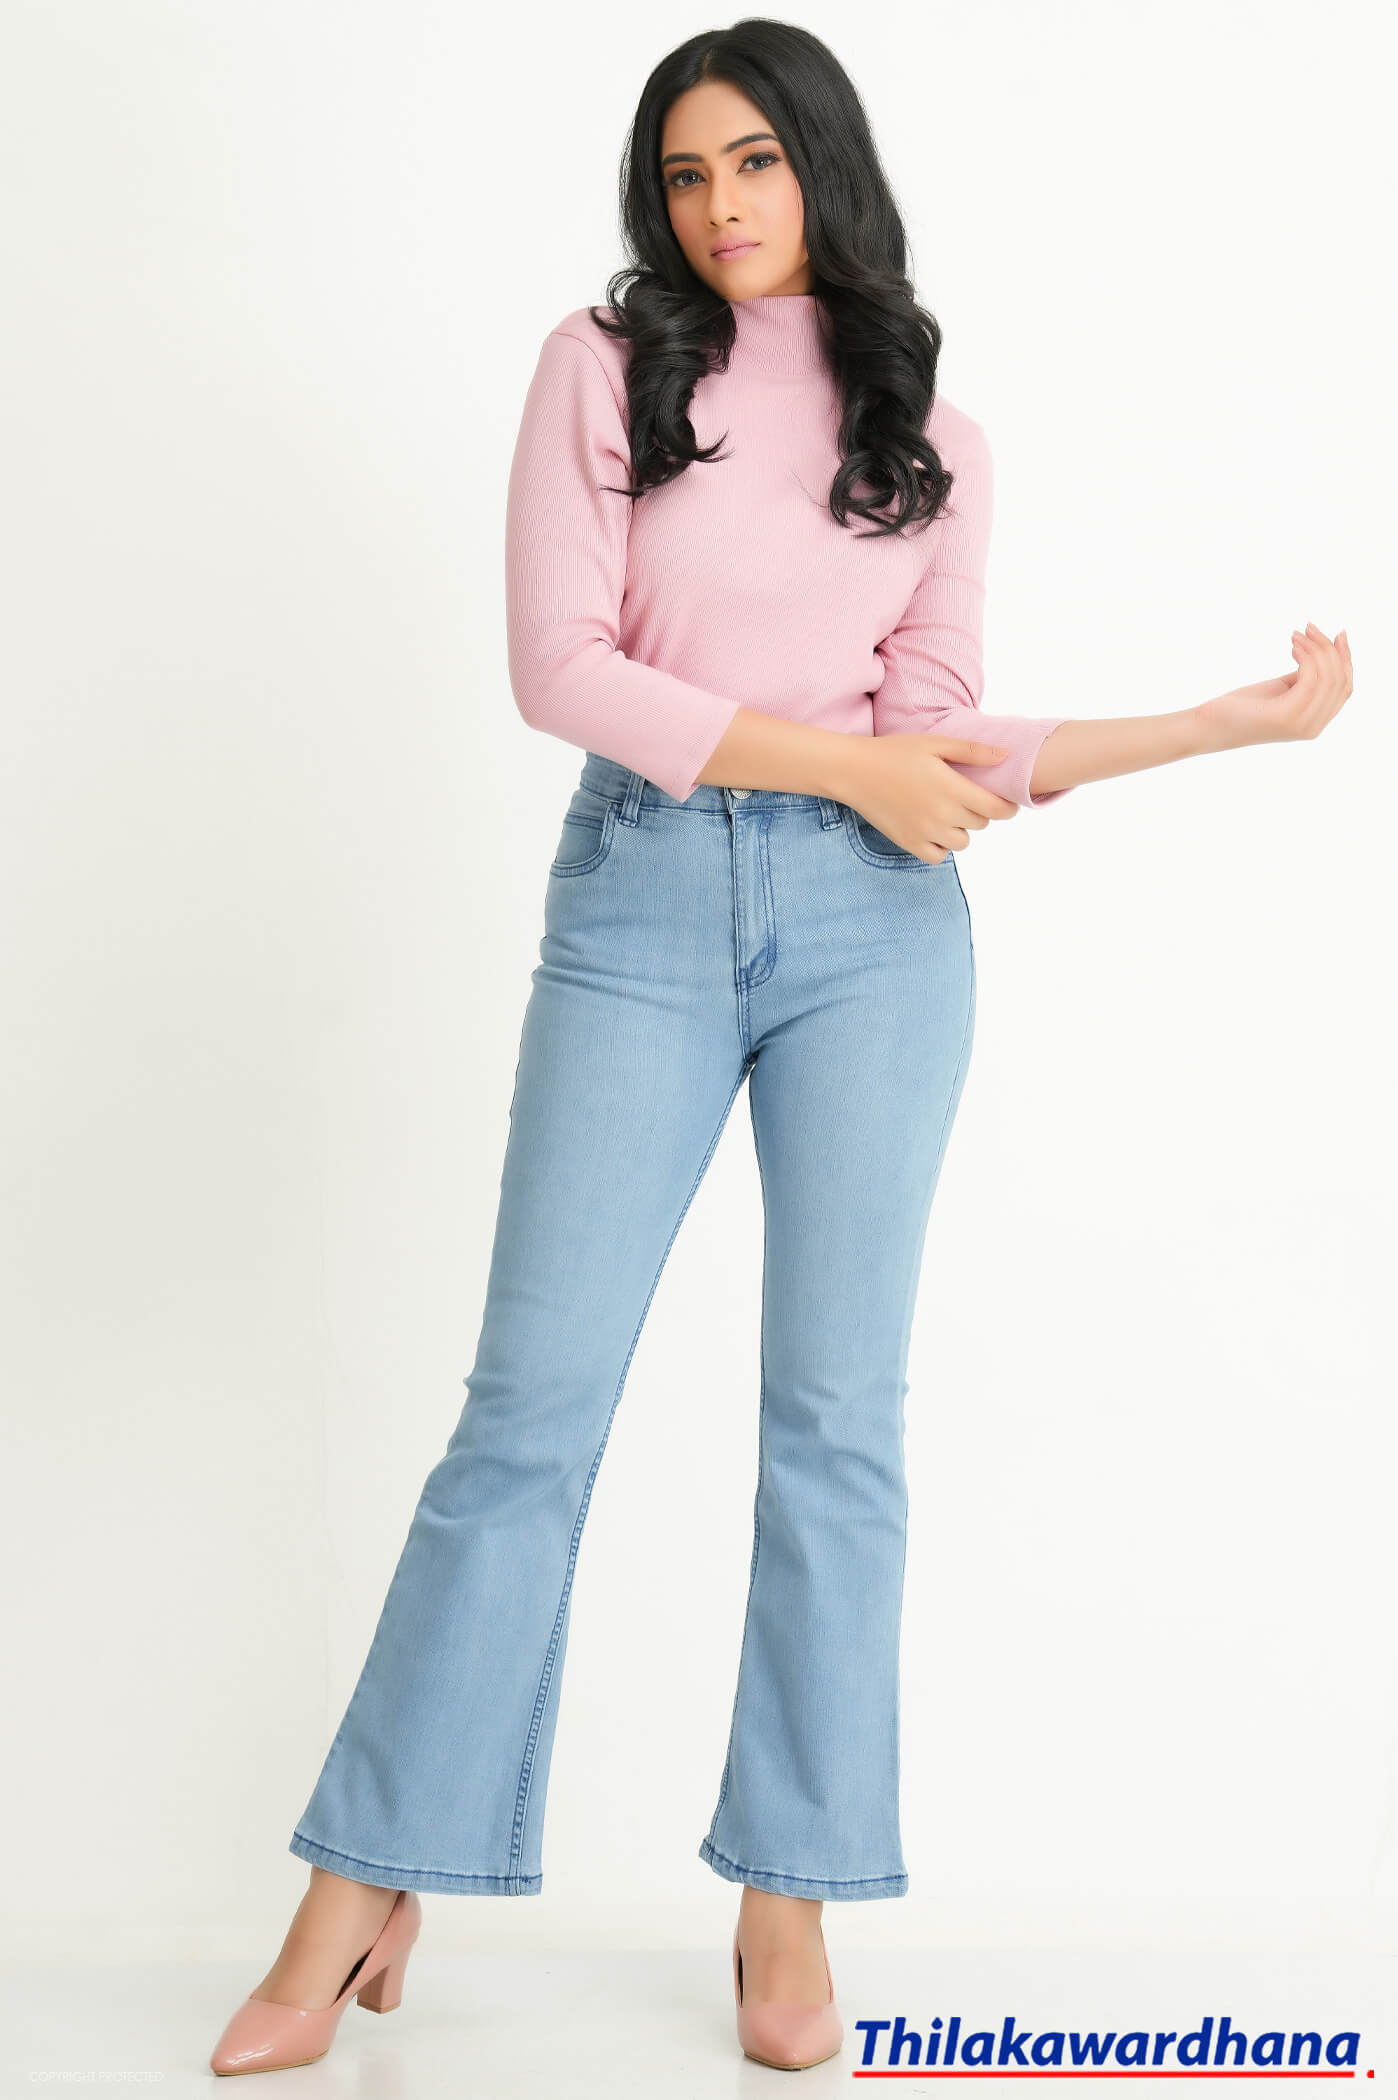 Buy Pantete Womens High Waisted Bell Bottom Jeans Denim High Rise Flare  Jean Pants with Wide Leg and Belt at Amazon.in